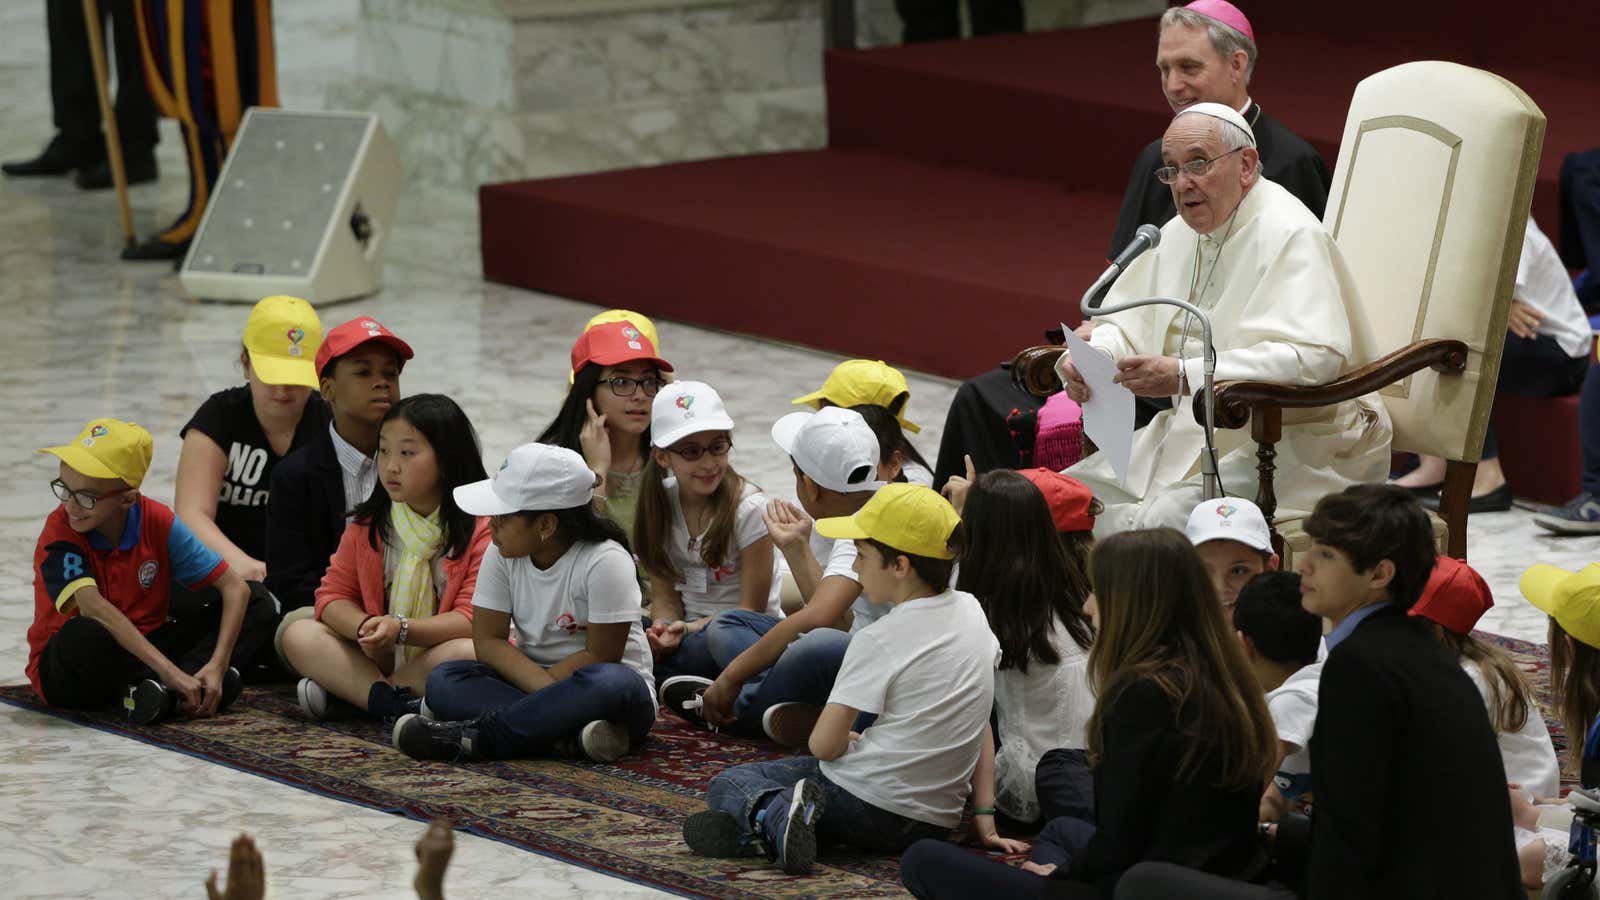 Not exactly storytime. Pope Francis at the May 11 event.